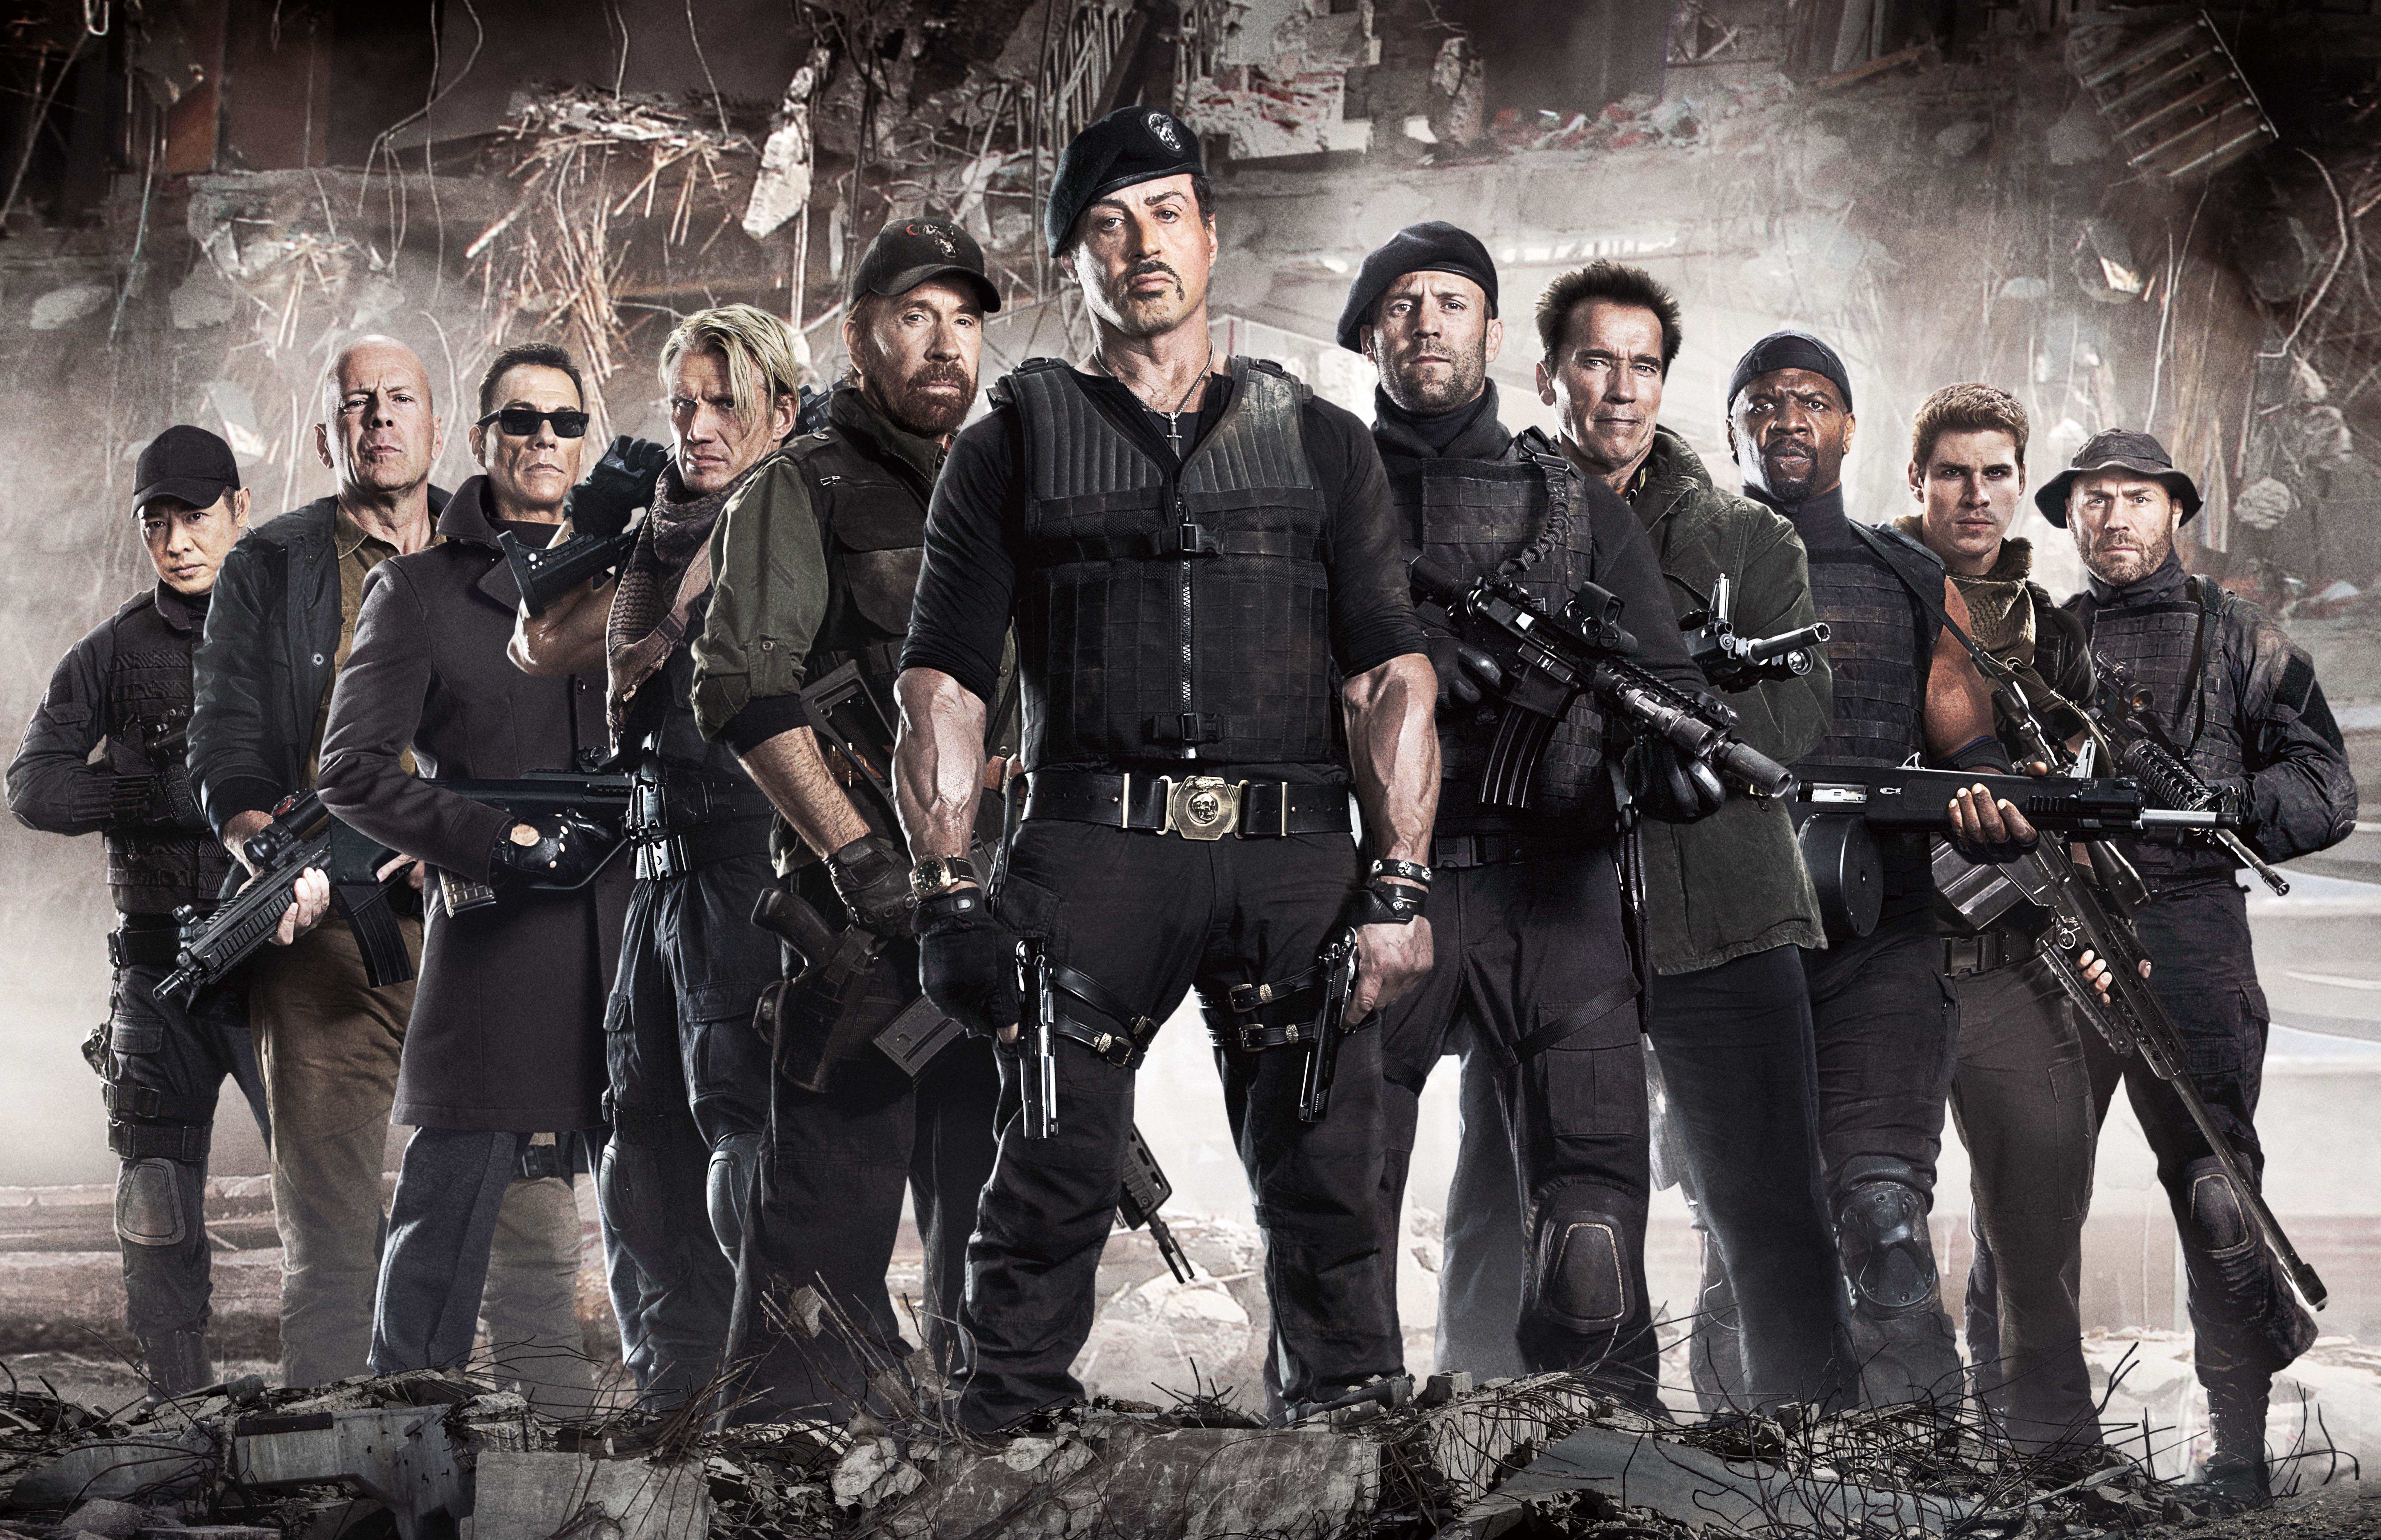 Movie The Expendables 2 wallpaper Desktop, Phone, Tablet